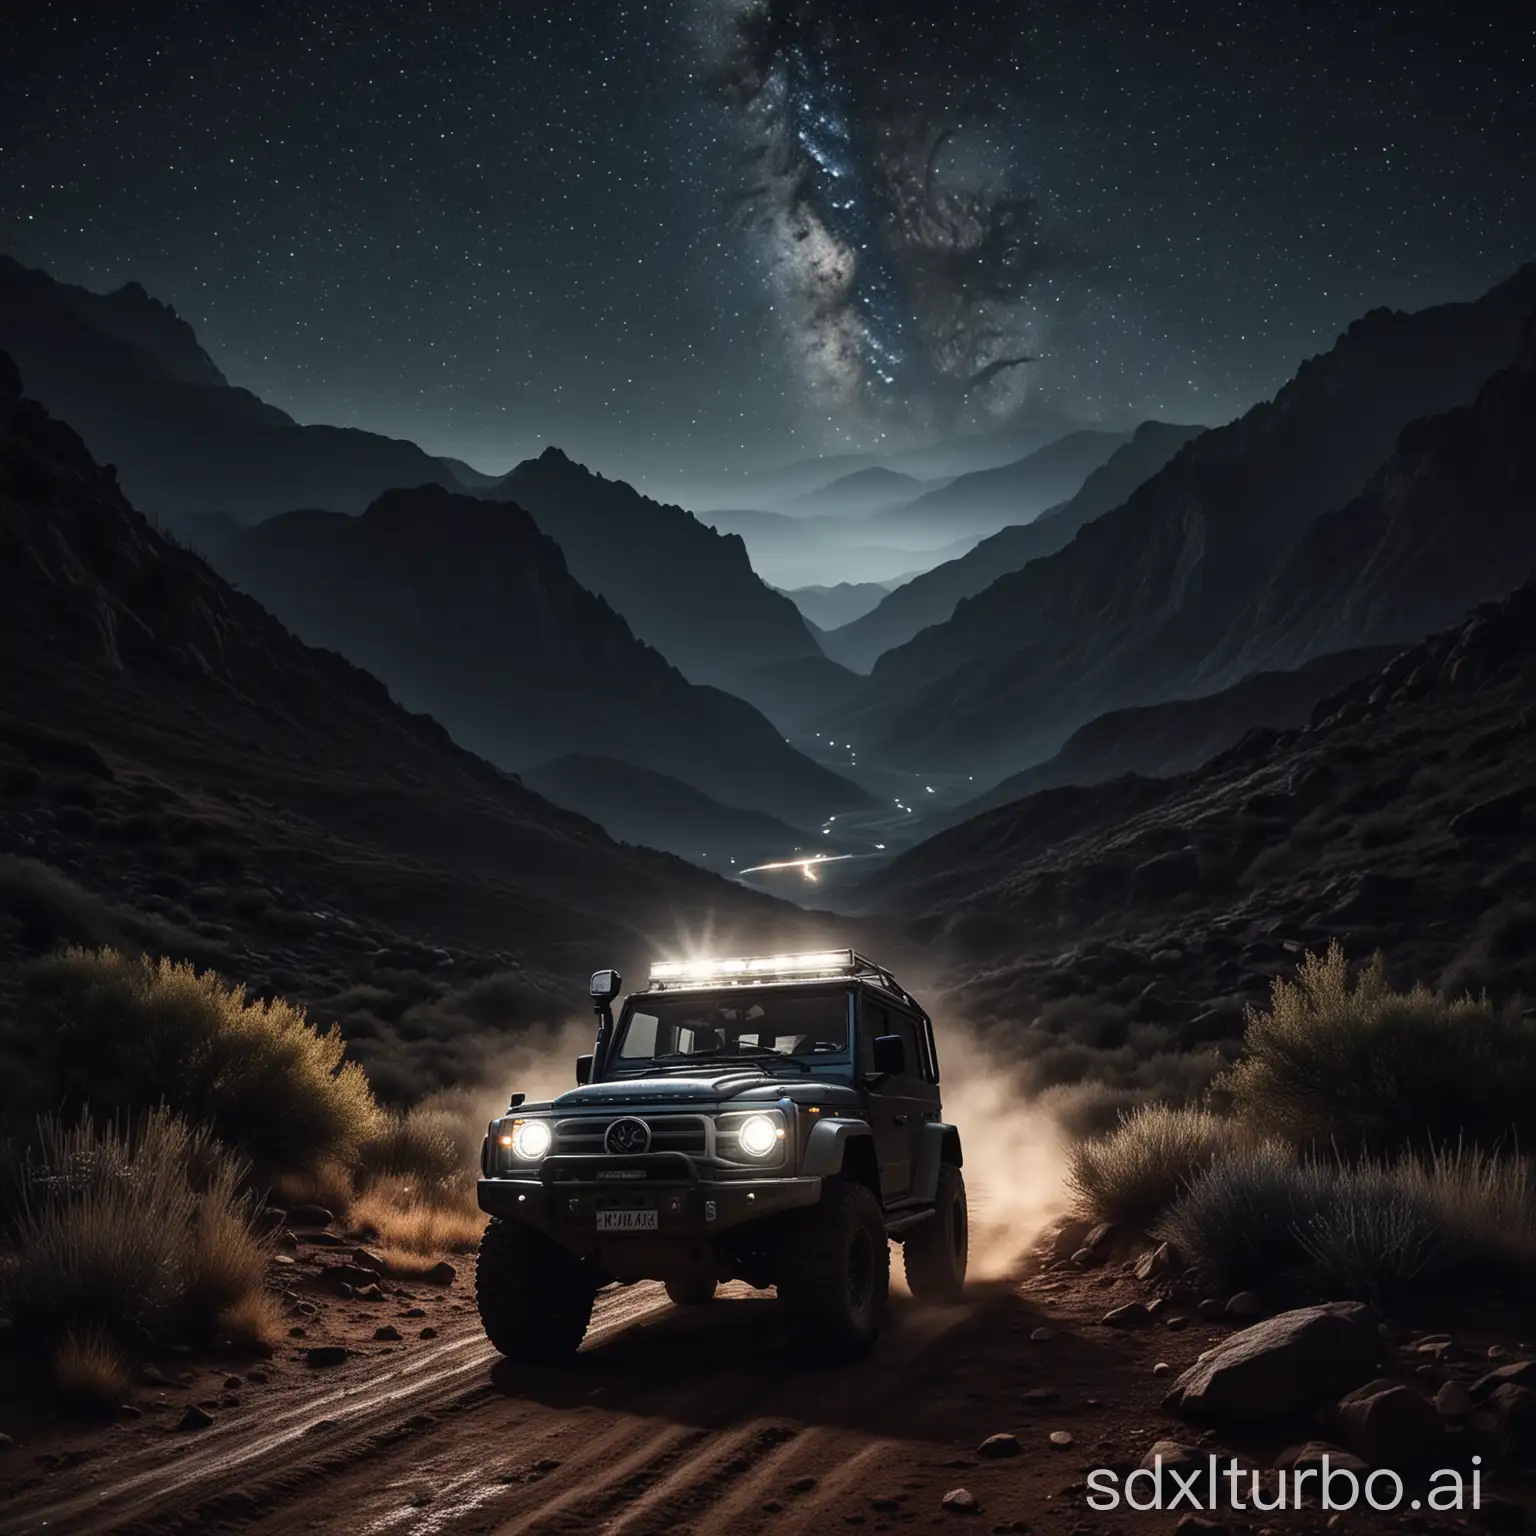 https://yxaiimgs.oss-cn-shenzhen.aliyuncs.com/uploads/images/20240501/202405011735371fb386781.jpg Under the starry sky, a off-road vehicle is traversing in the distance. The headlights draw two straight lines, illuminating the far-off area. The background is comprised of mountains, and the lighting is in dark tones, highlighting the details and textures.